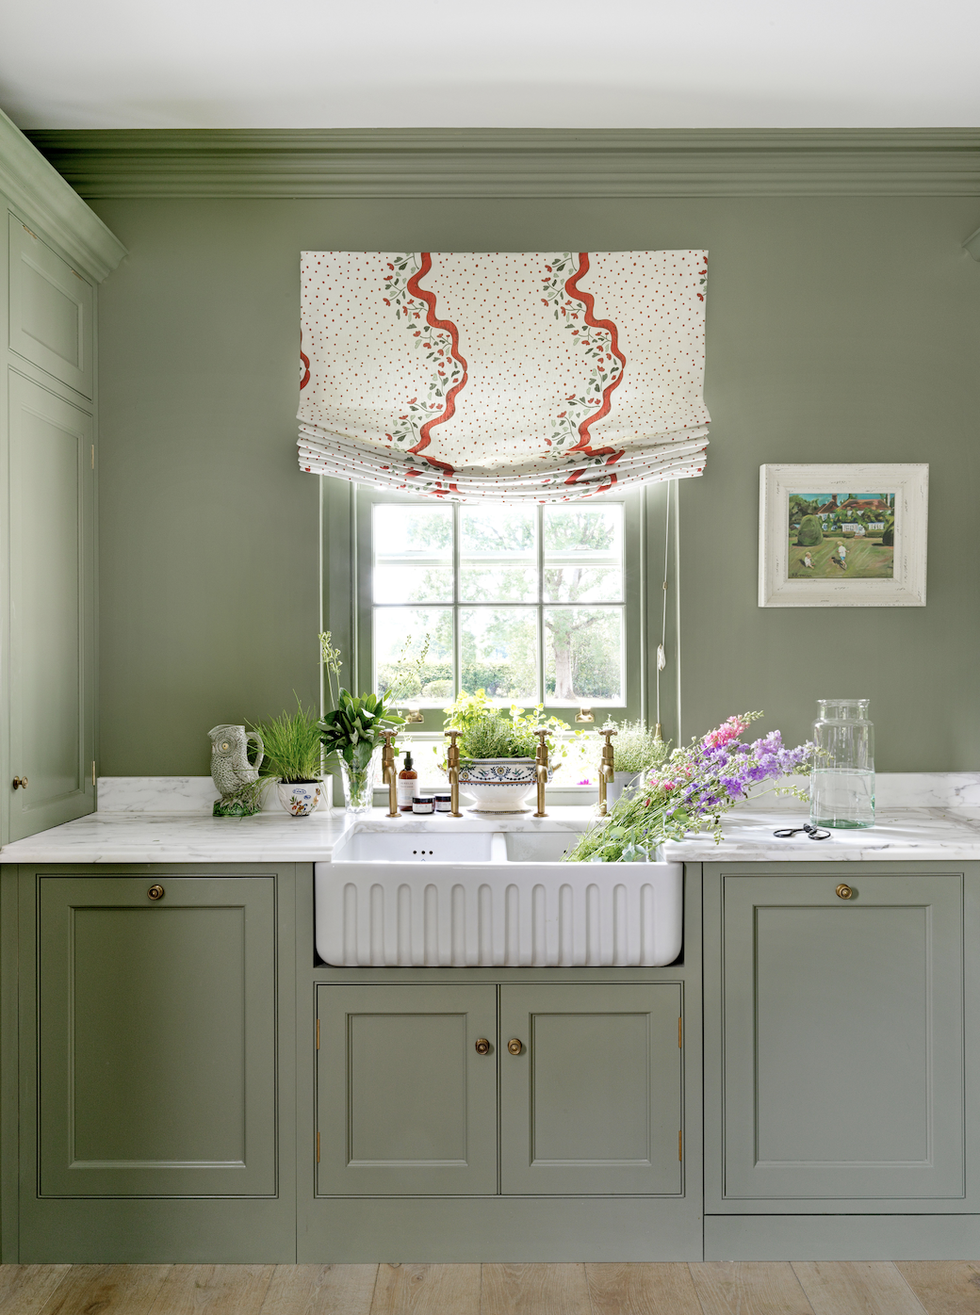 16 Kitchen Curtain Ideas That'll Add Immediate Charm to Your Space